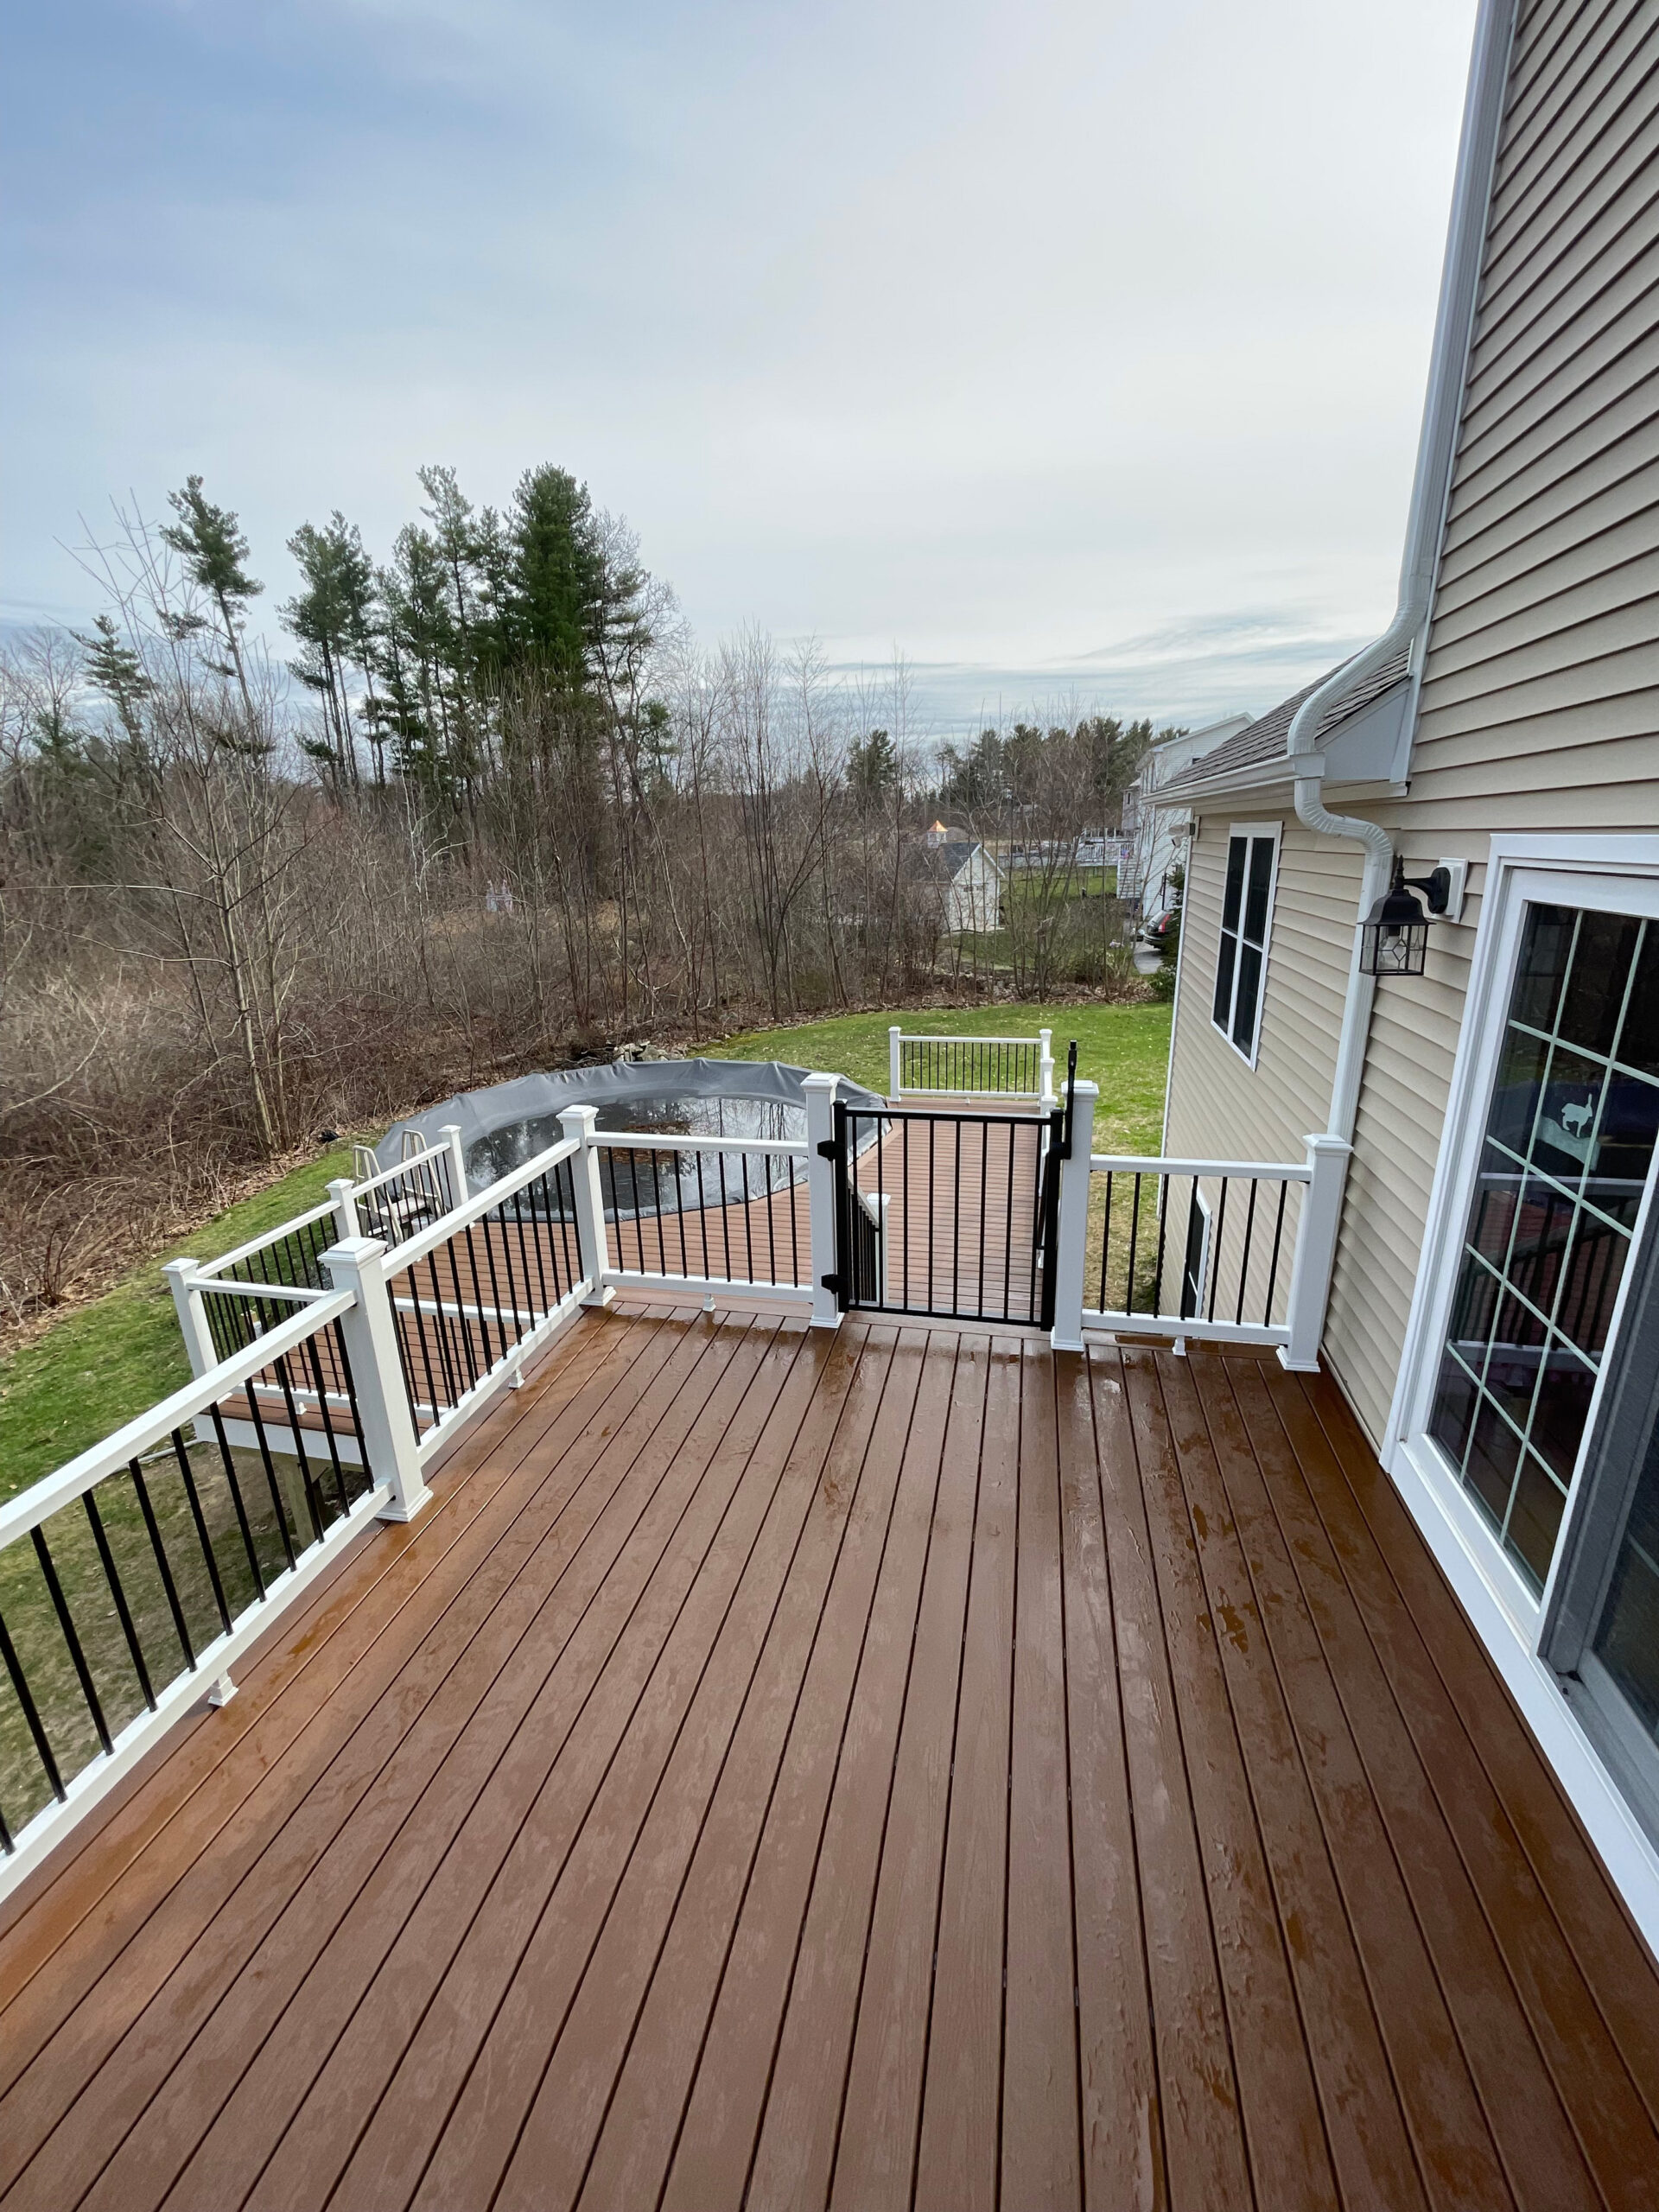 New deck build with trex saddle decking and white railings in Rutland MA.